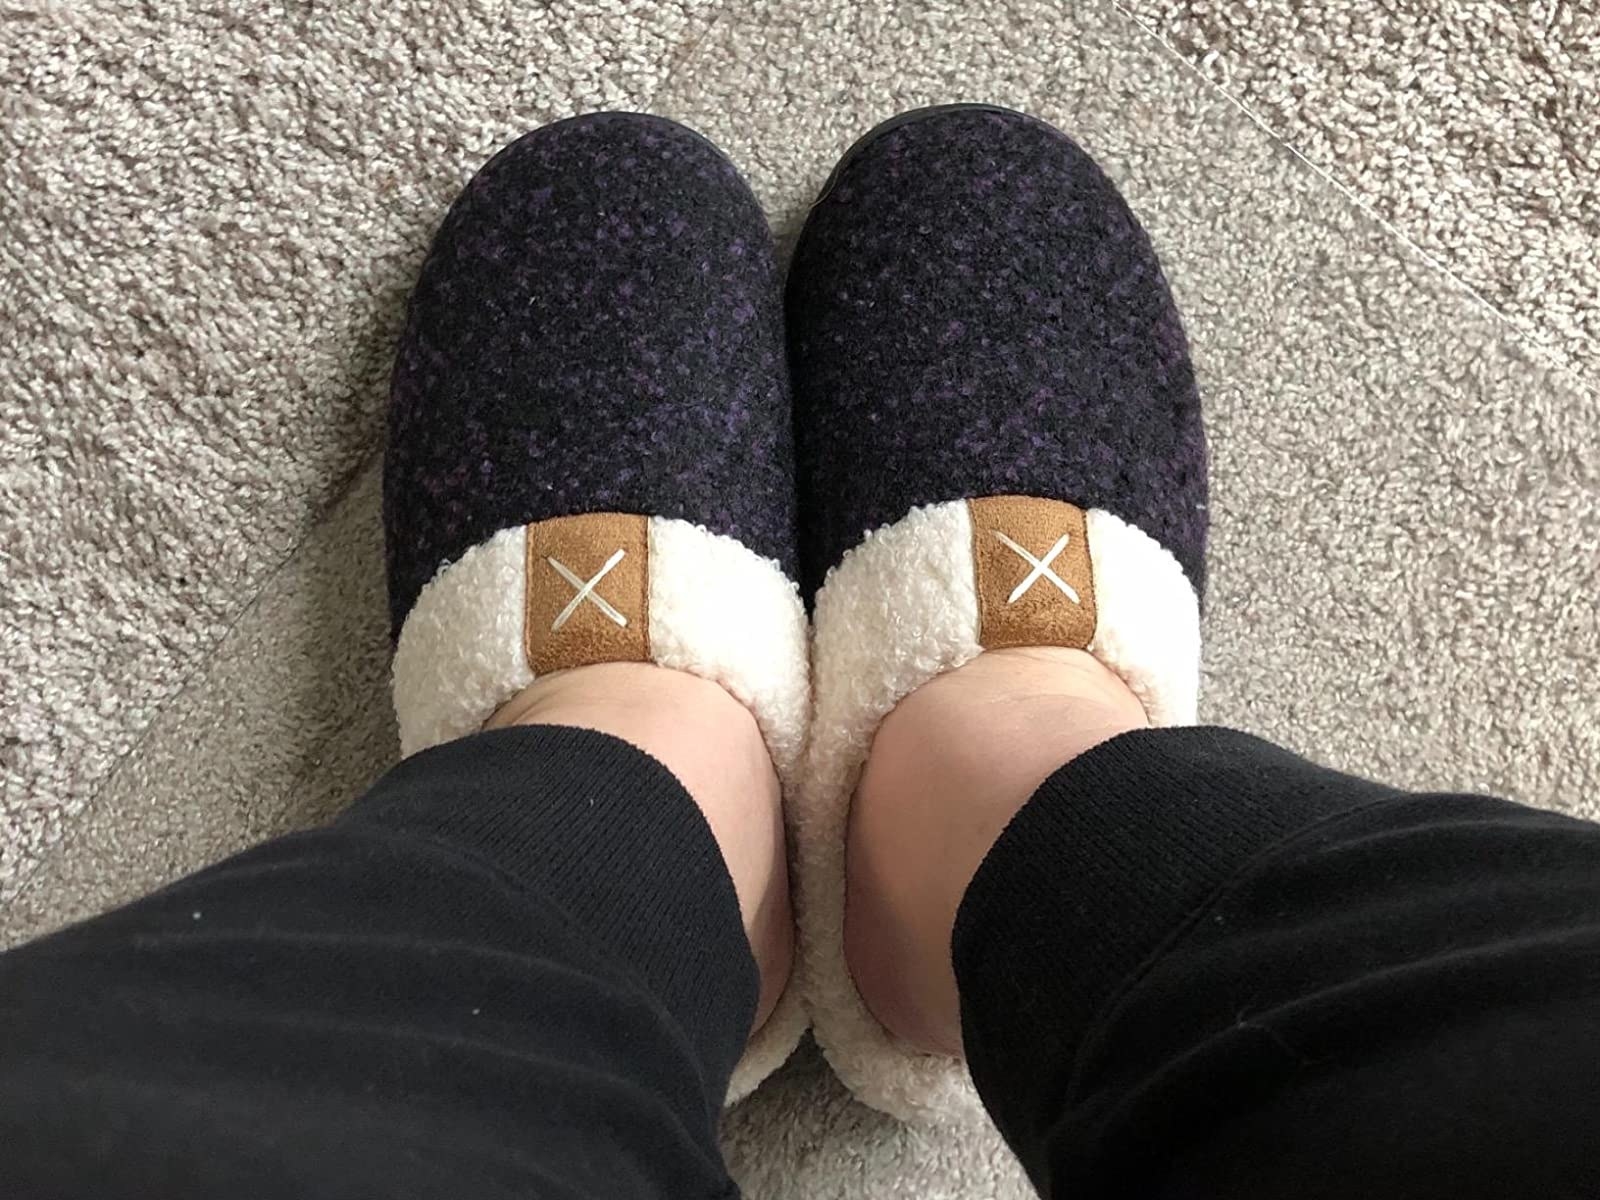 Reviewer photo of them wearing the slippers